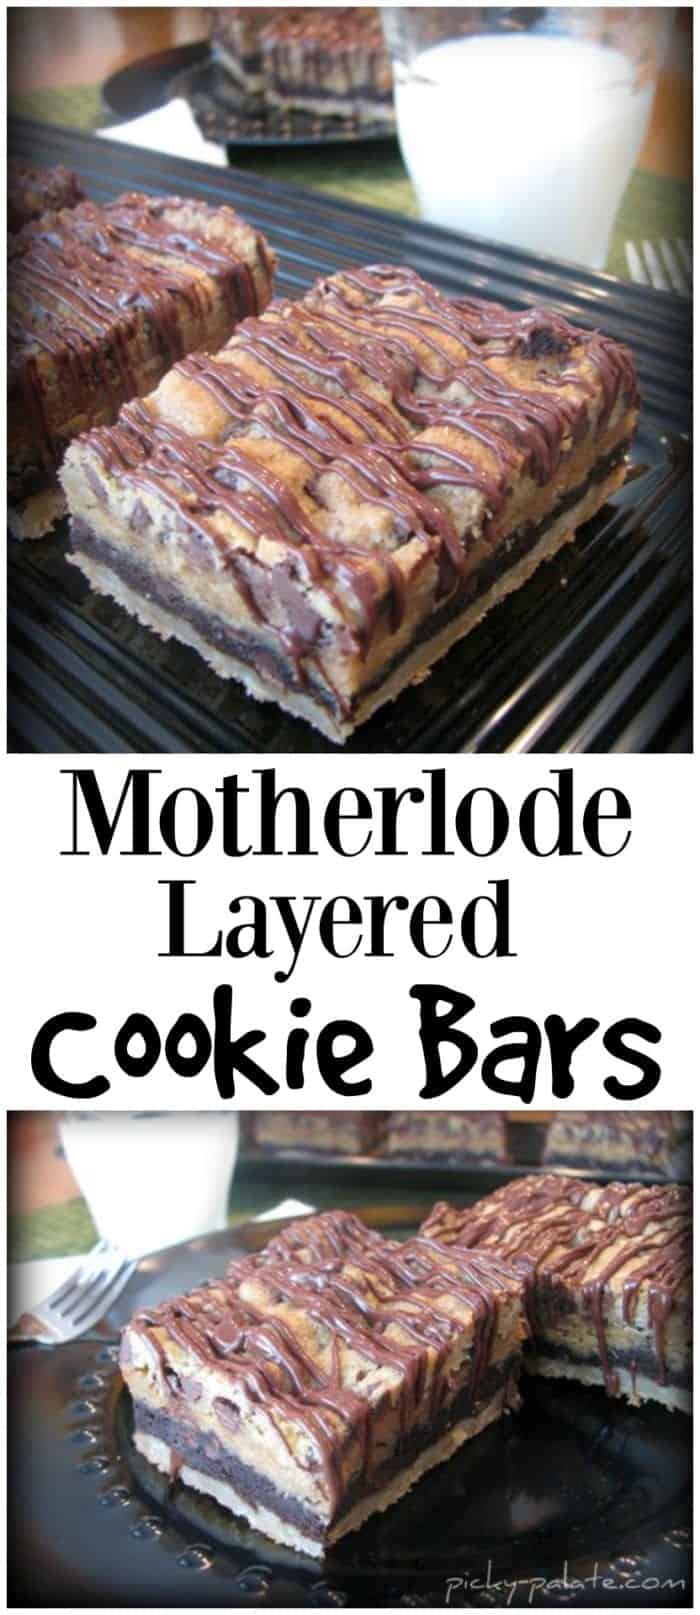 motherlode layered cookie bars